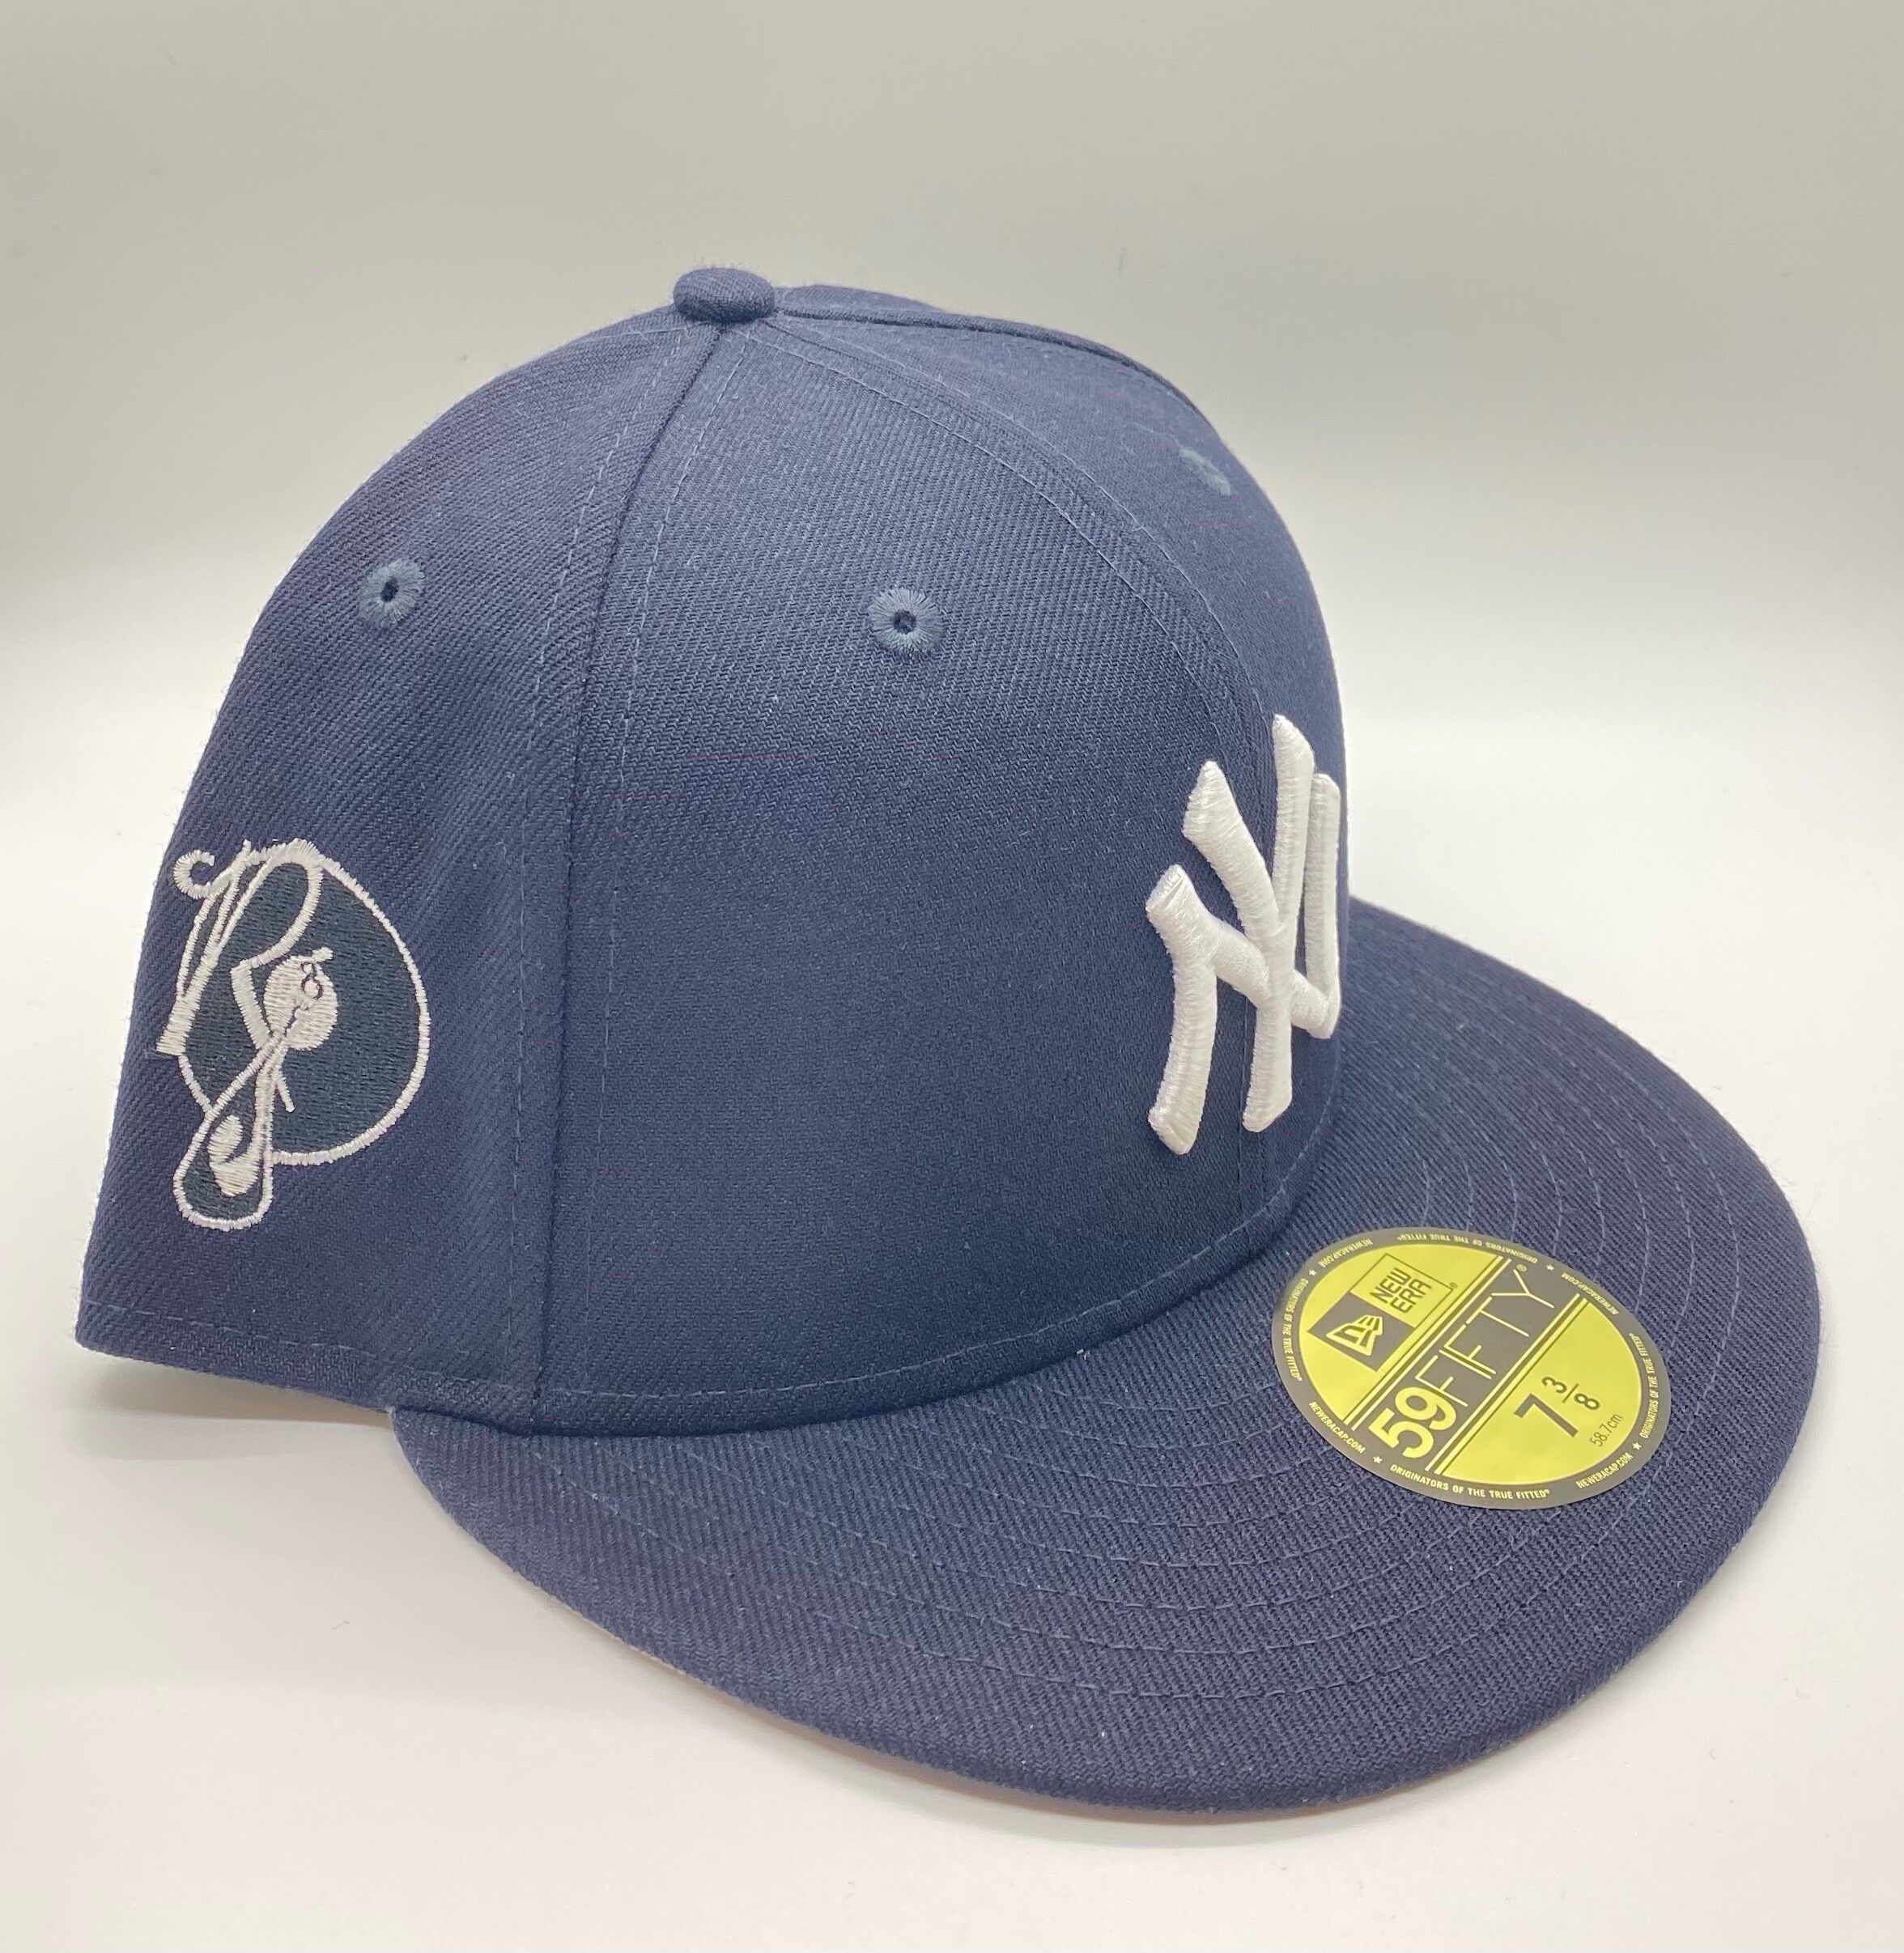 New Era New York Yankees “Roc A Fella” Fitted Hat | Grailed